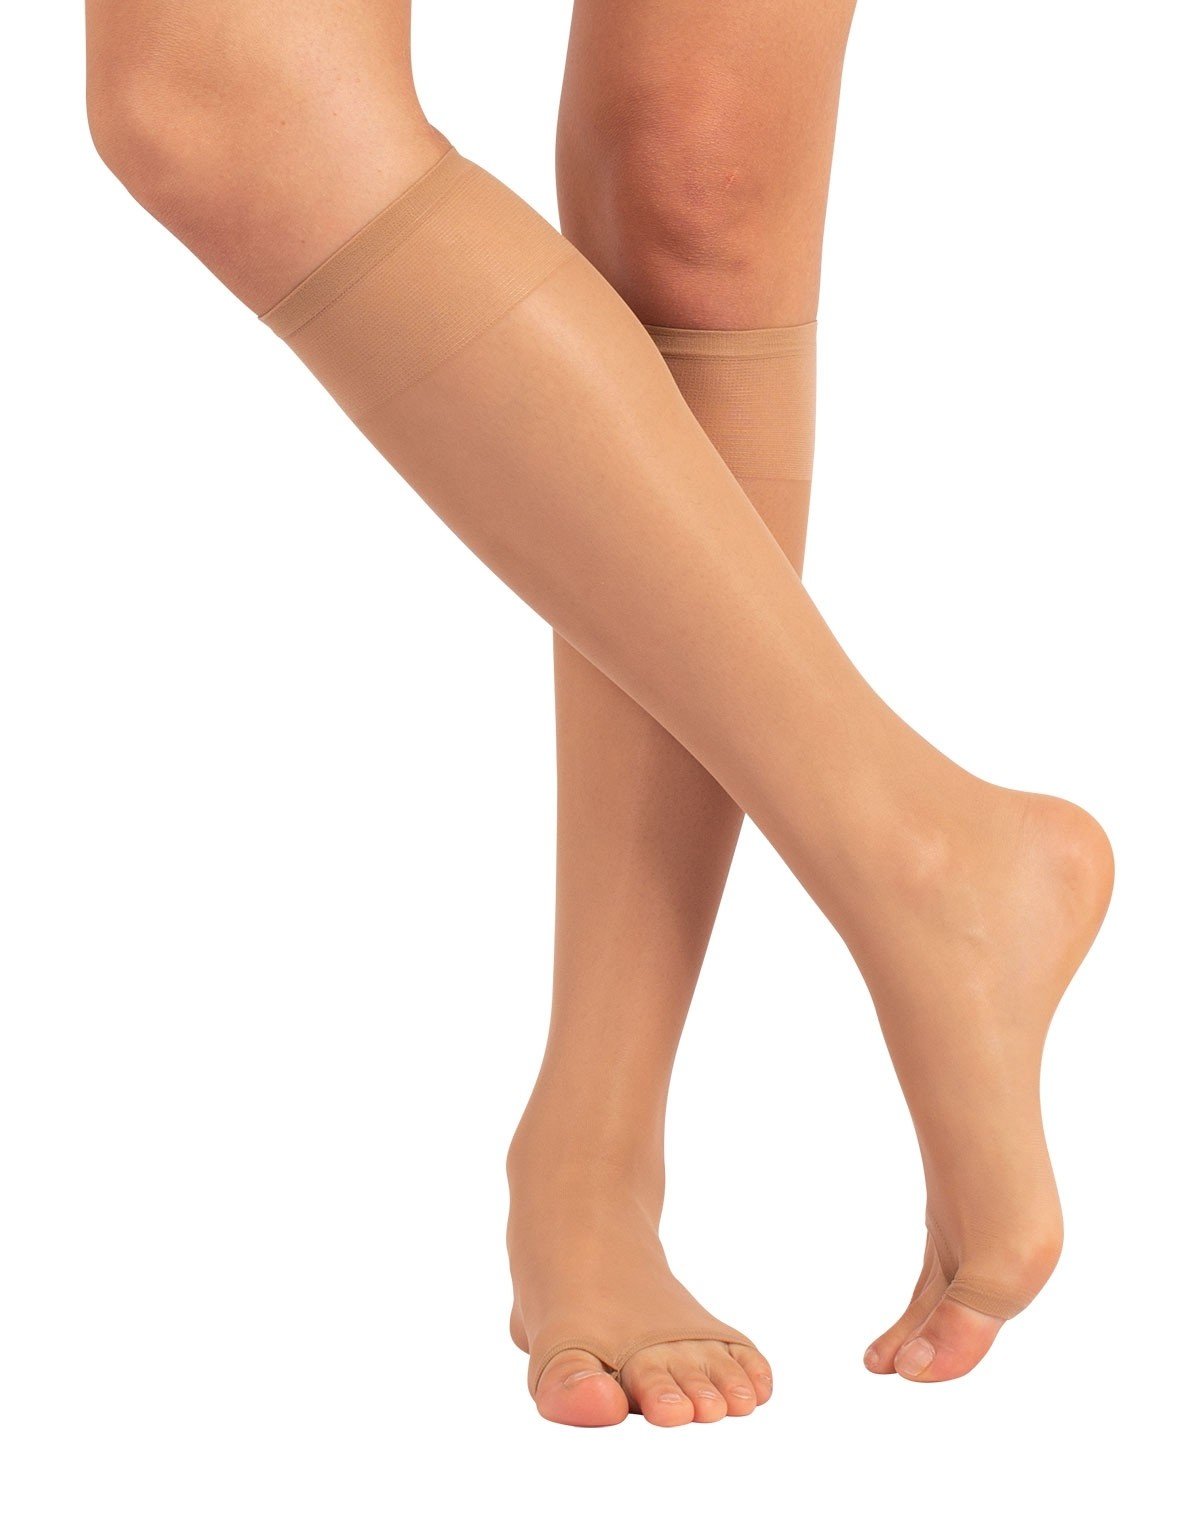 Calzitaly 16236 Open-toe knee-high socks - sheer nude 10 denier toeless pop-socks, perfect for wearing with sandals and peep-toe shoes